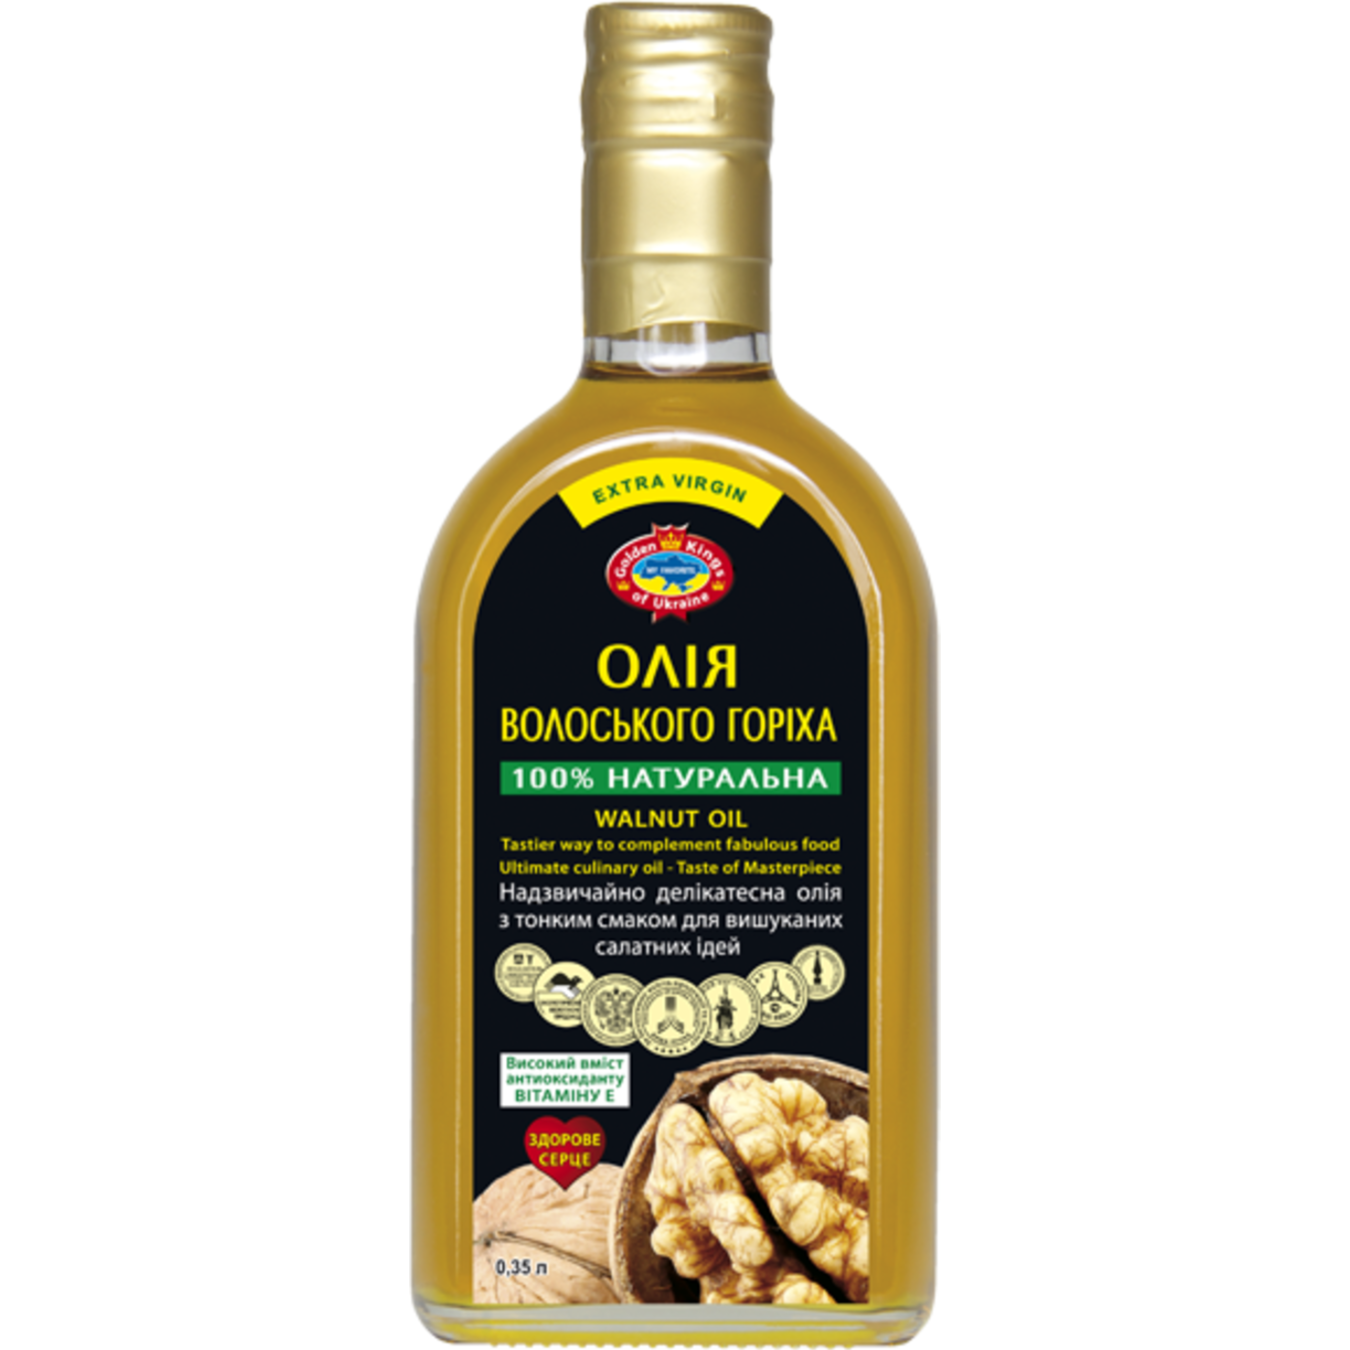 Golden Kings of Ukraine Unrefined and Non-deodorized Walnut Oil of the First Cold Pressing 350ml